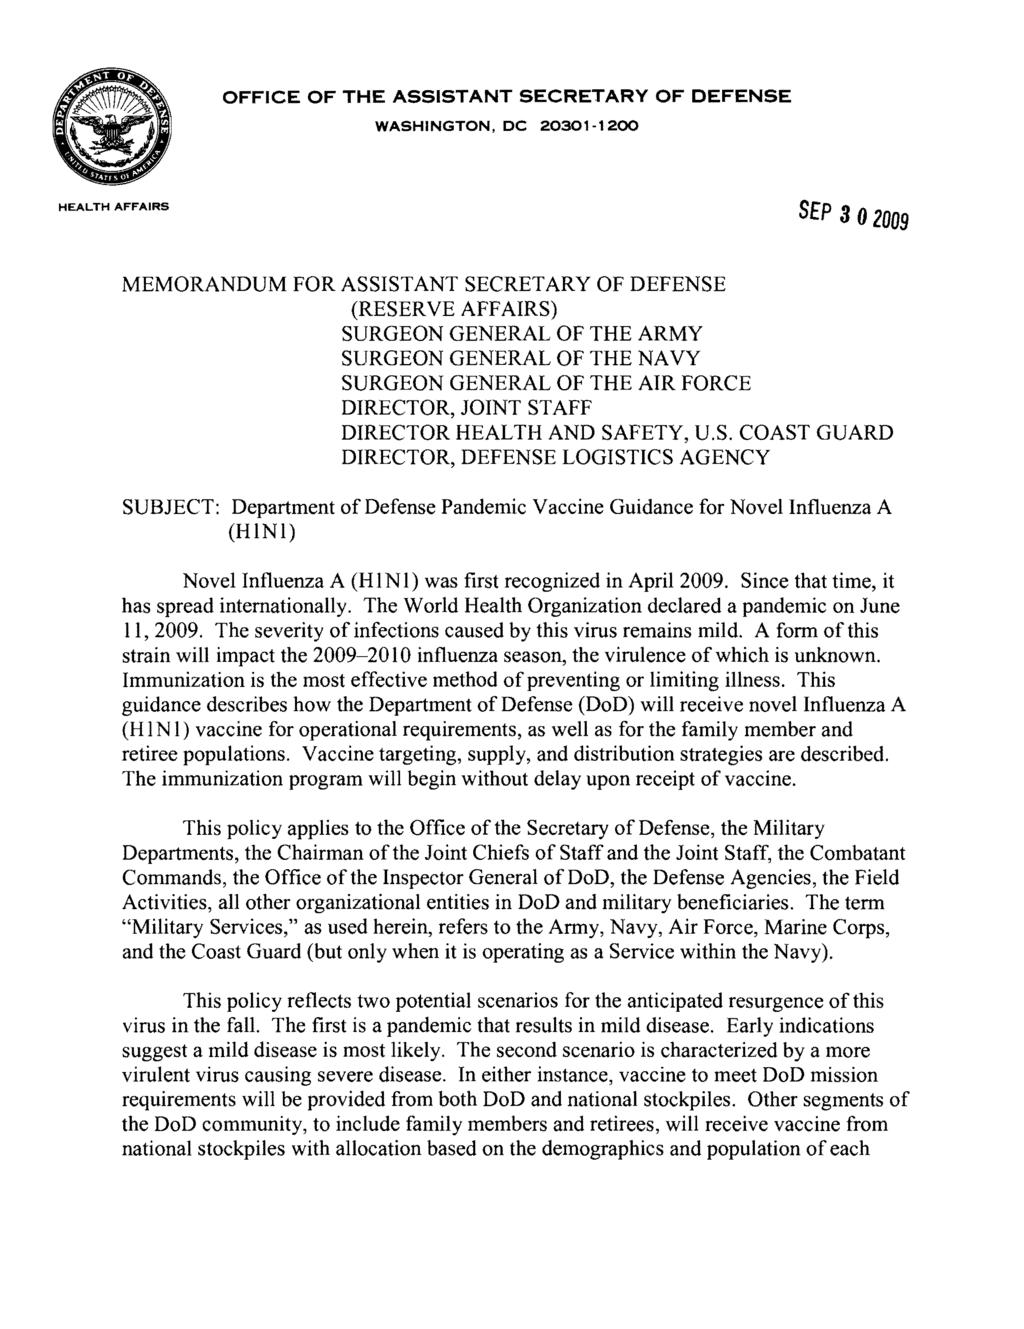 OFFICE OF THE ASSISTANT SECRETARY OF DEFENSE WASHINGTON, DC 20301-1200 HEALTH AFFAIRS SEP 3 0 2009 MEMORANDUM FOR ASSISTANT SECRETARY OF DEFENSE (RESER VE AFFAIRS) SURGEON GENERAL OF THE ARMY SURGEON